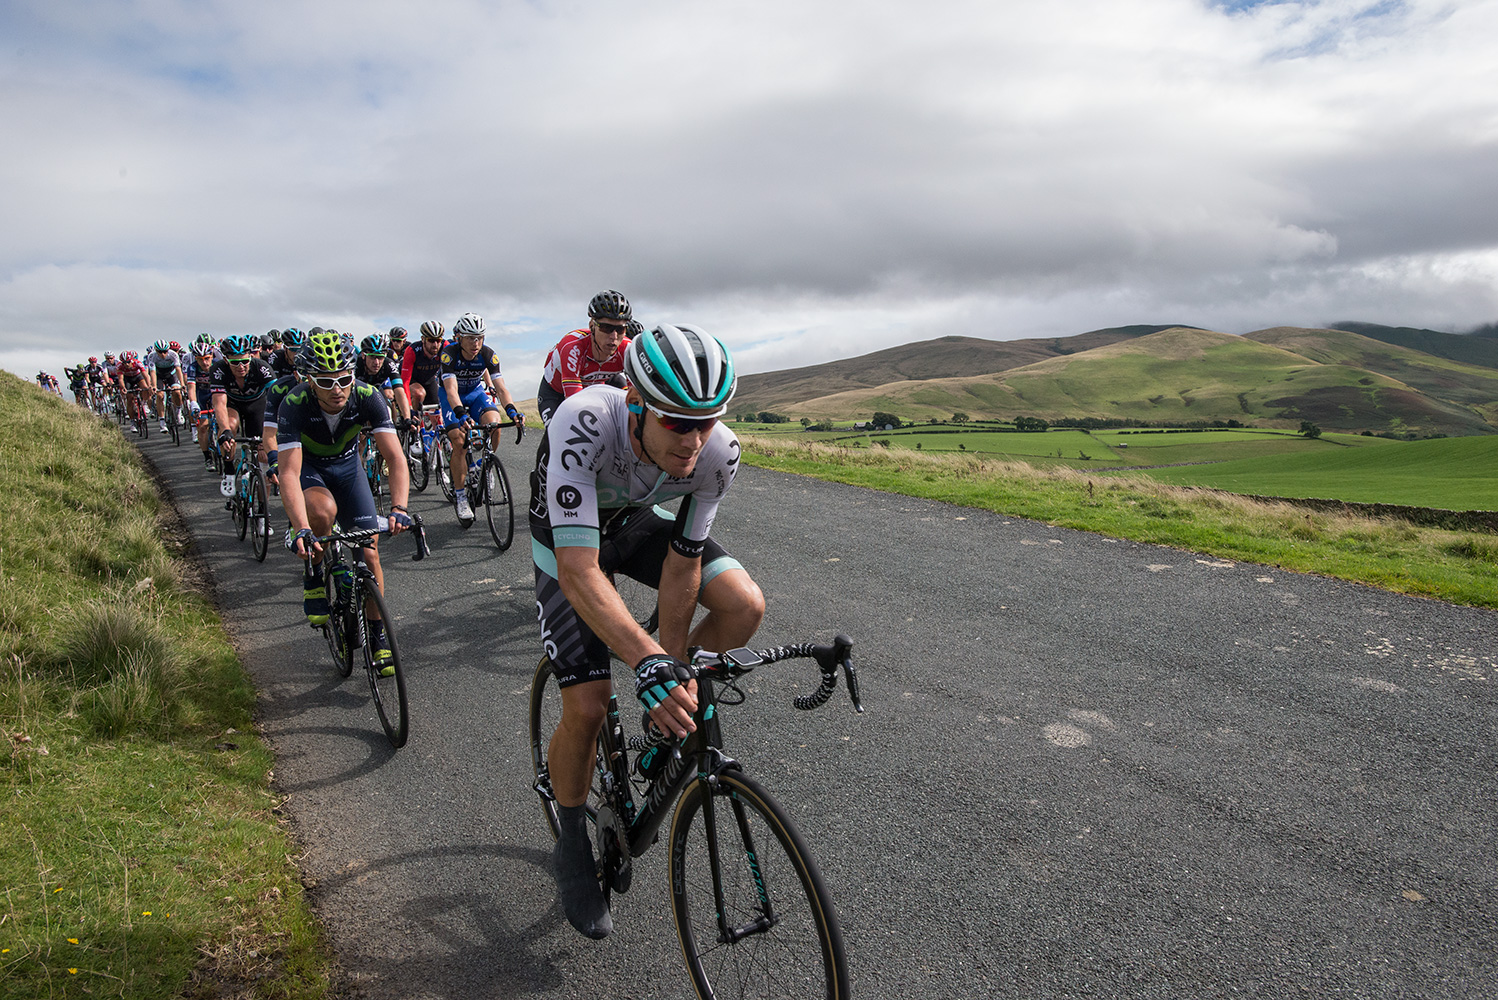 The peleton at the top of the descent into Uldale from Caldbeck Commons